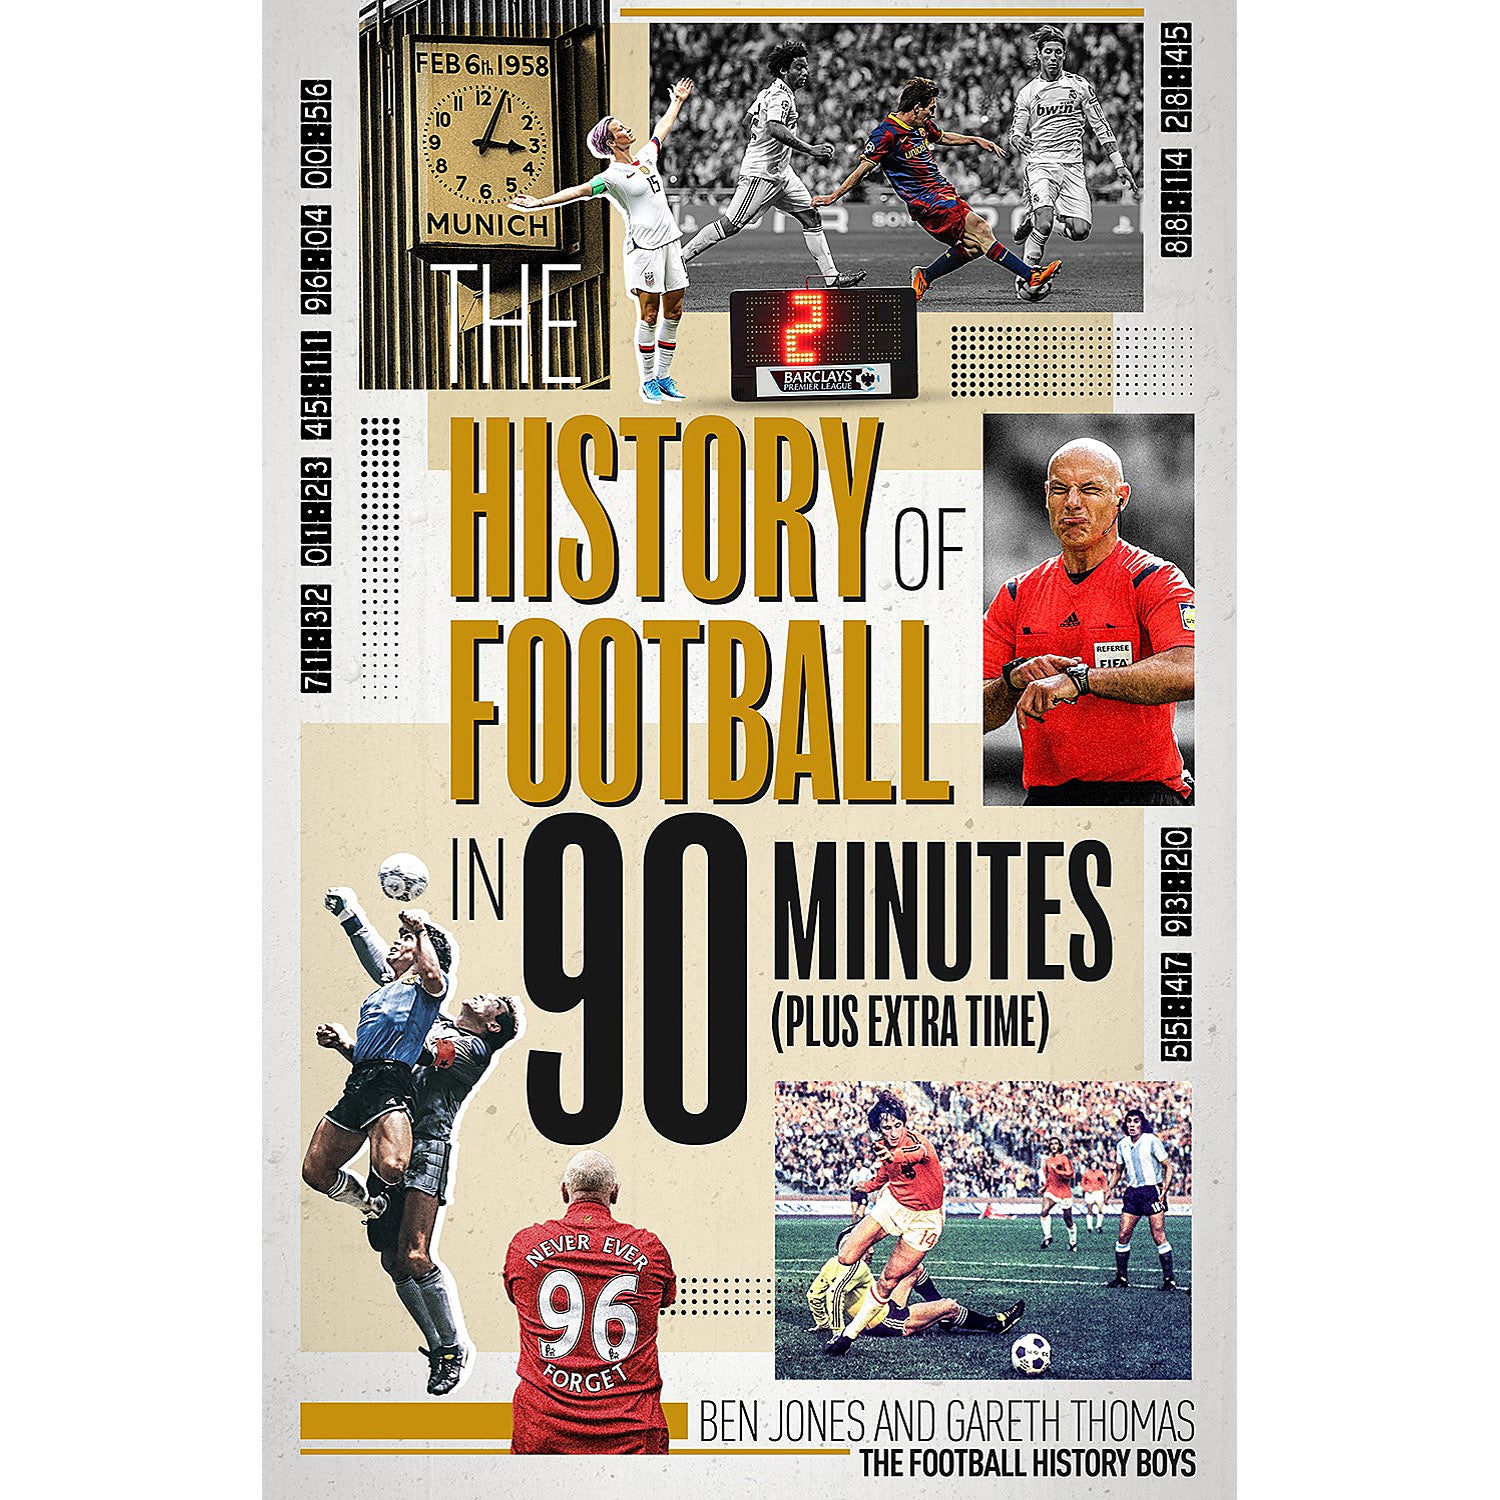 The History of Football in 90 Minutes (Plus Extra Time)